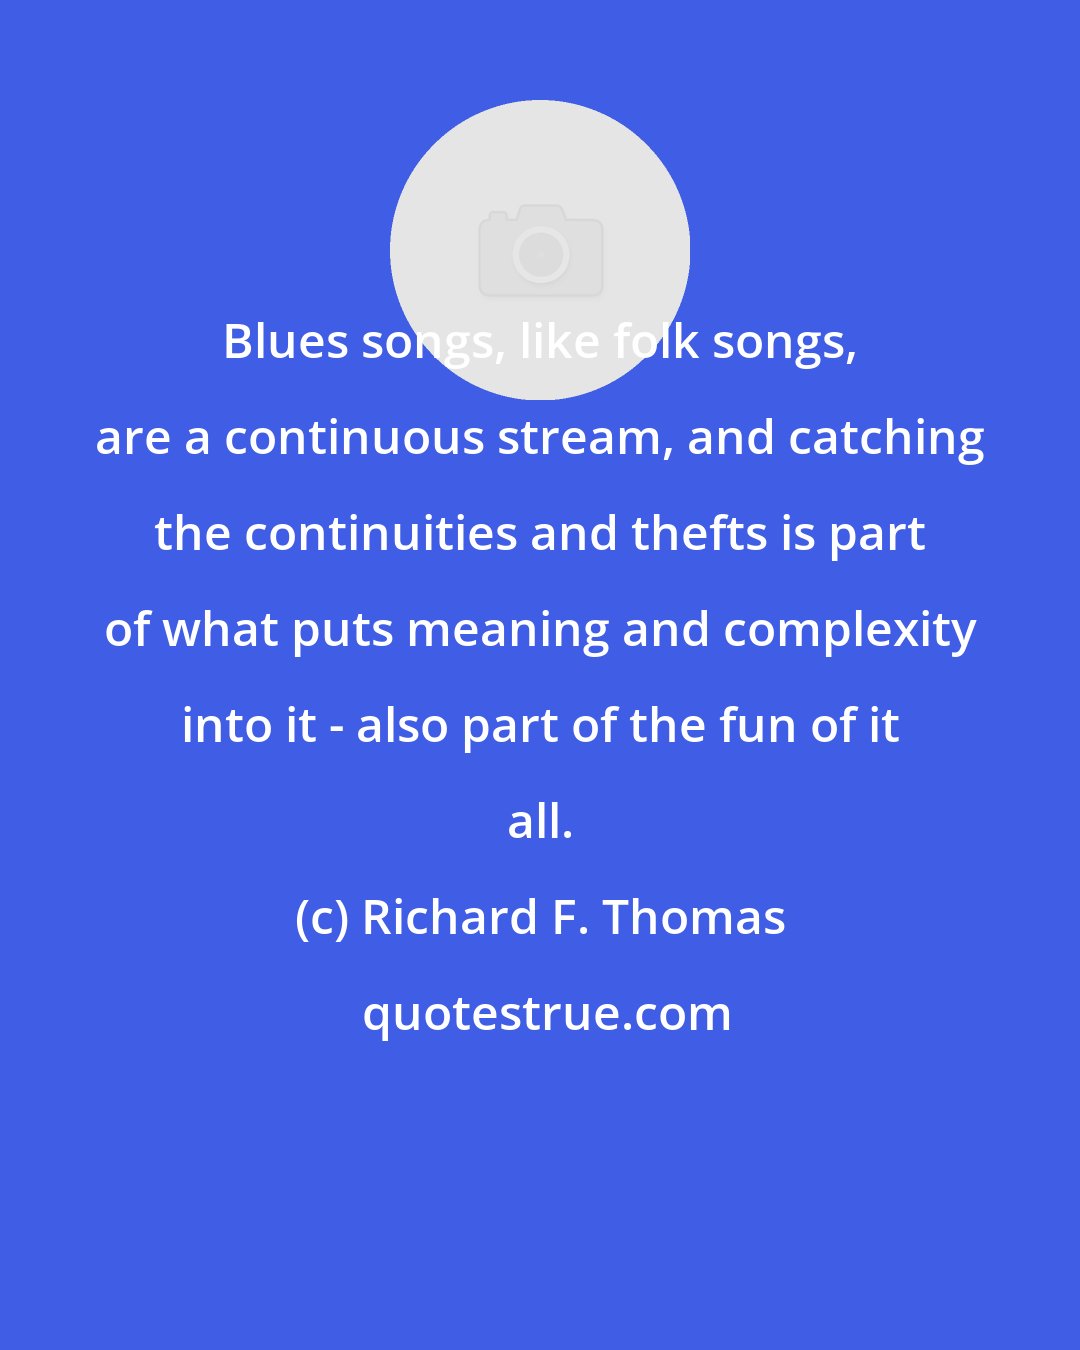 Richard F. Thomas: Blues songs, like folk songs, are a continuous stream, and catching the continuities and thefts is part of what puts meaning and complexity into it - also part of the fun of it all.